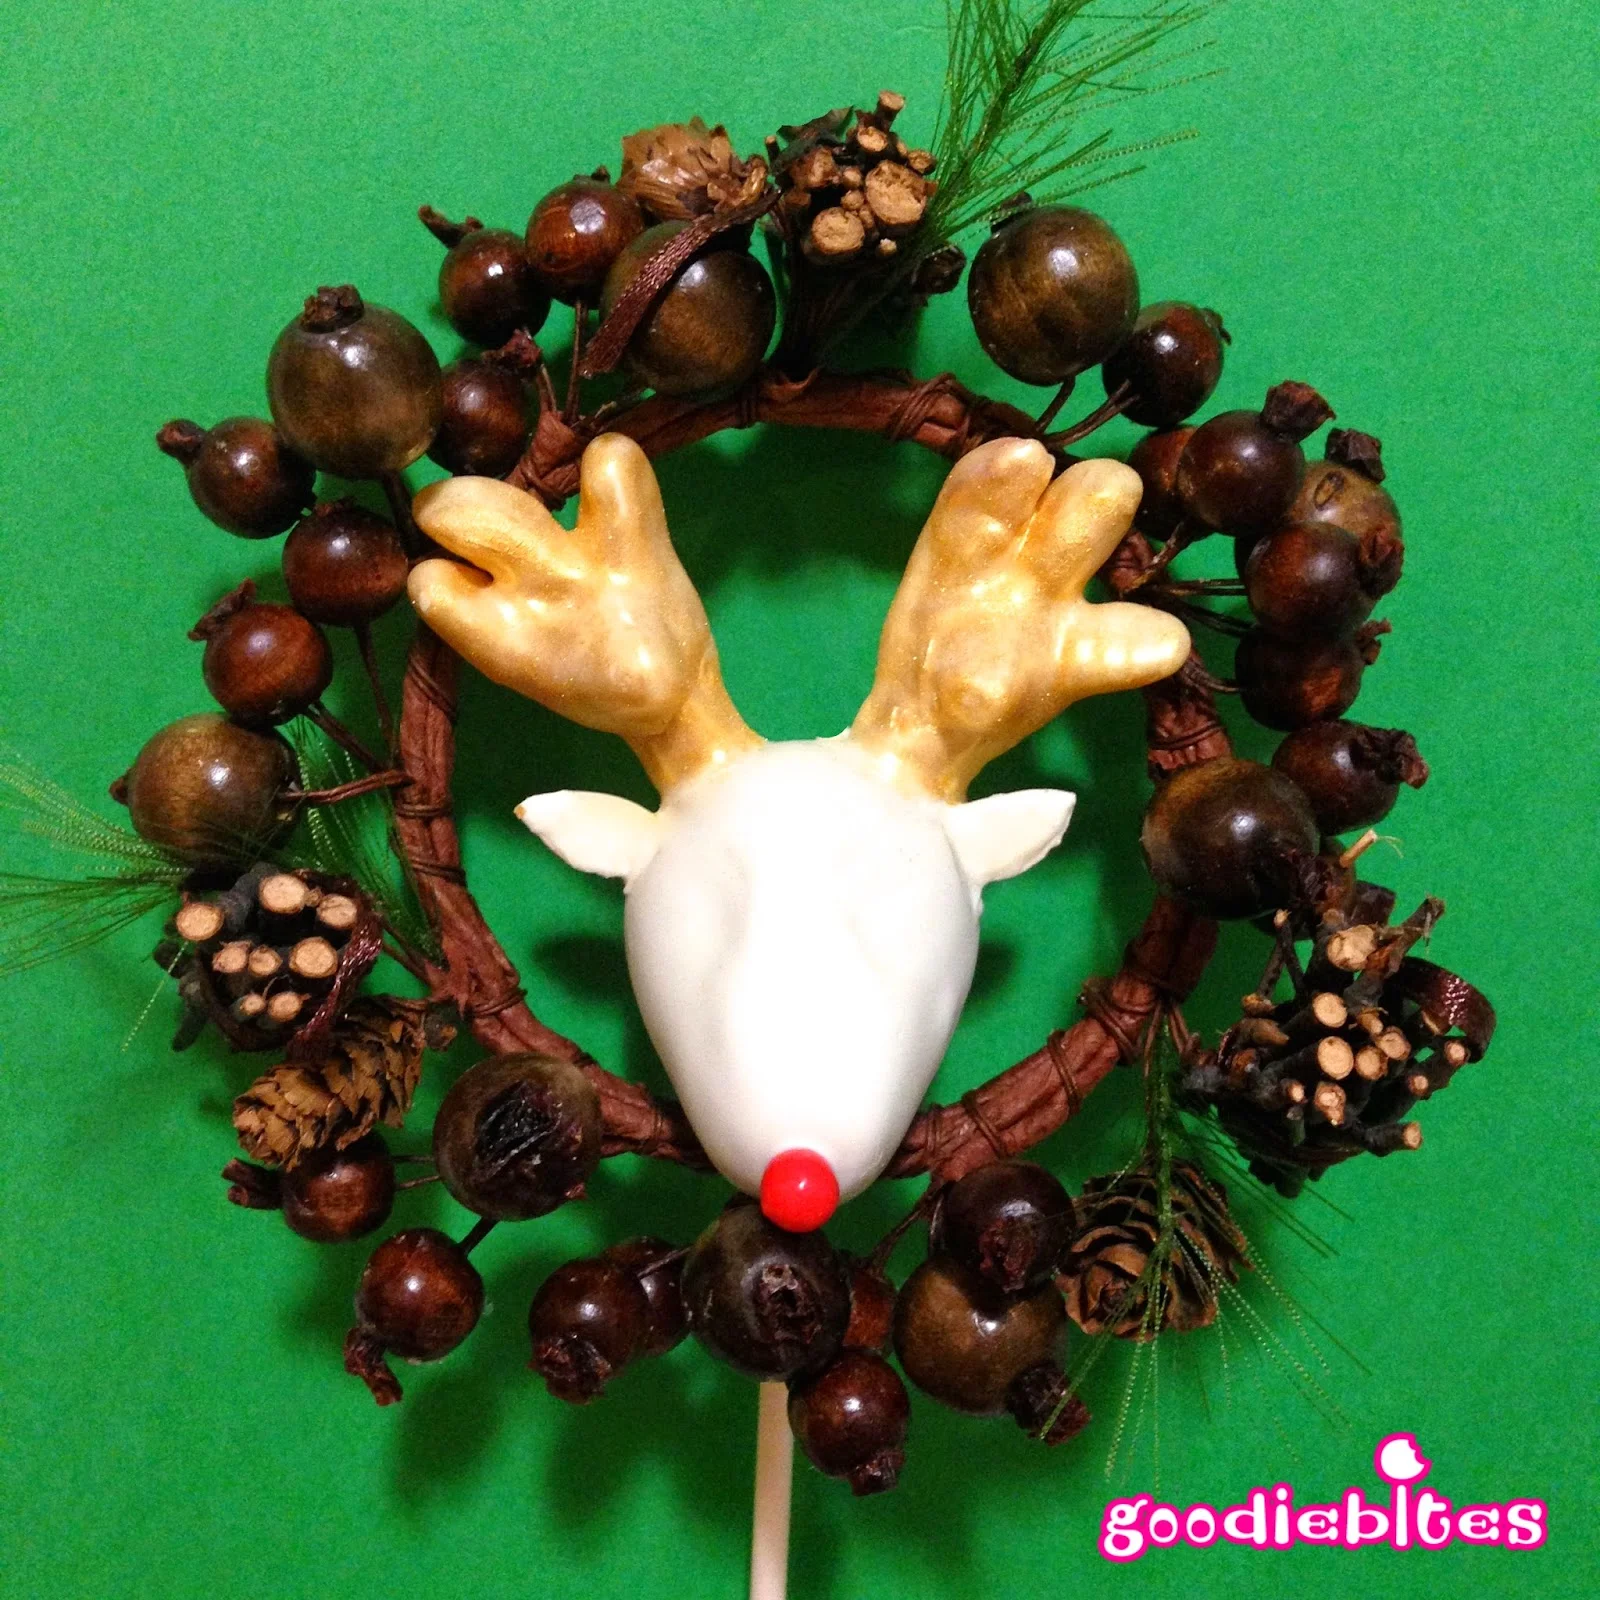 Reindeer busts are all the rage, so why not have fun and make some Rudolph Cake Pops for your Christmas party! This tutorial shows you how!